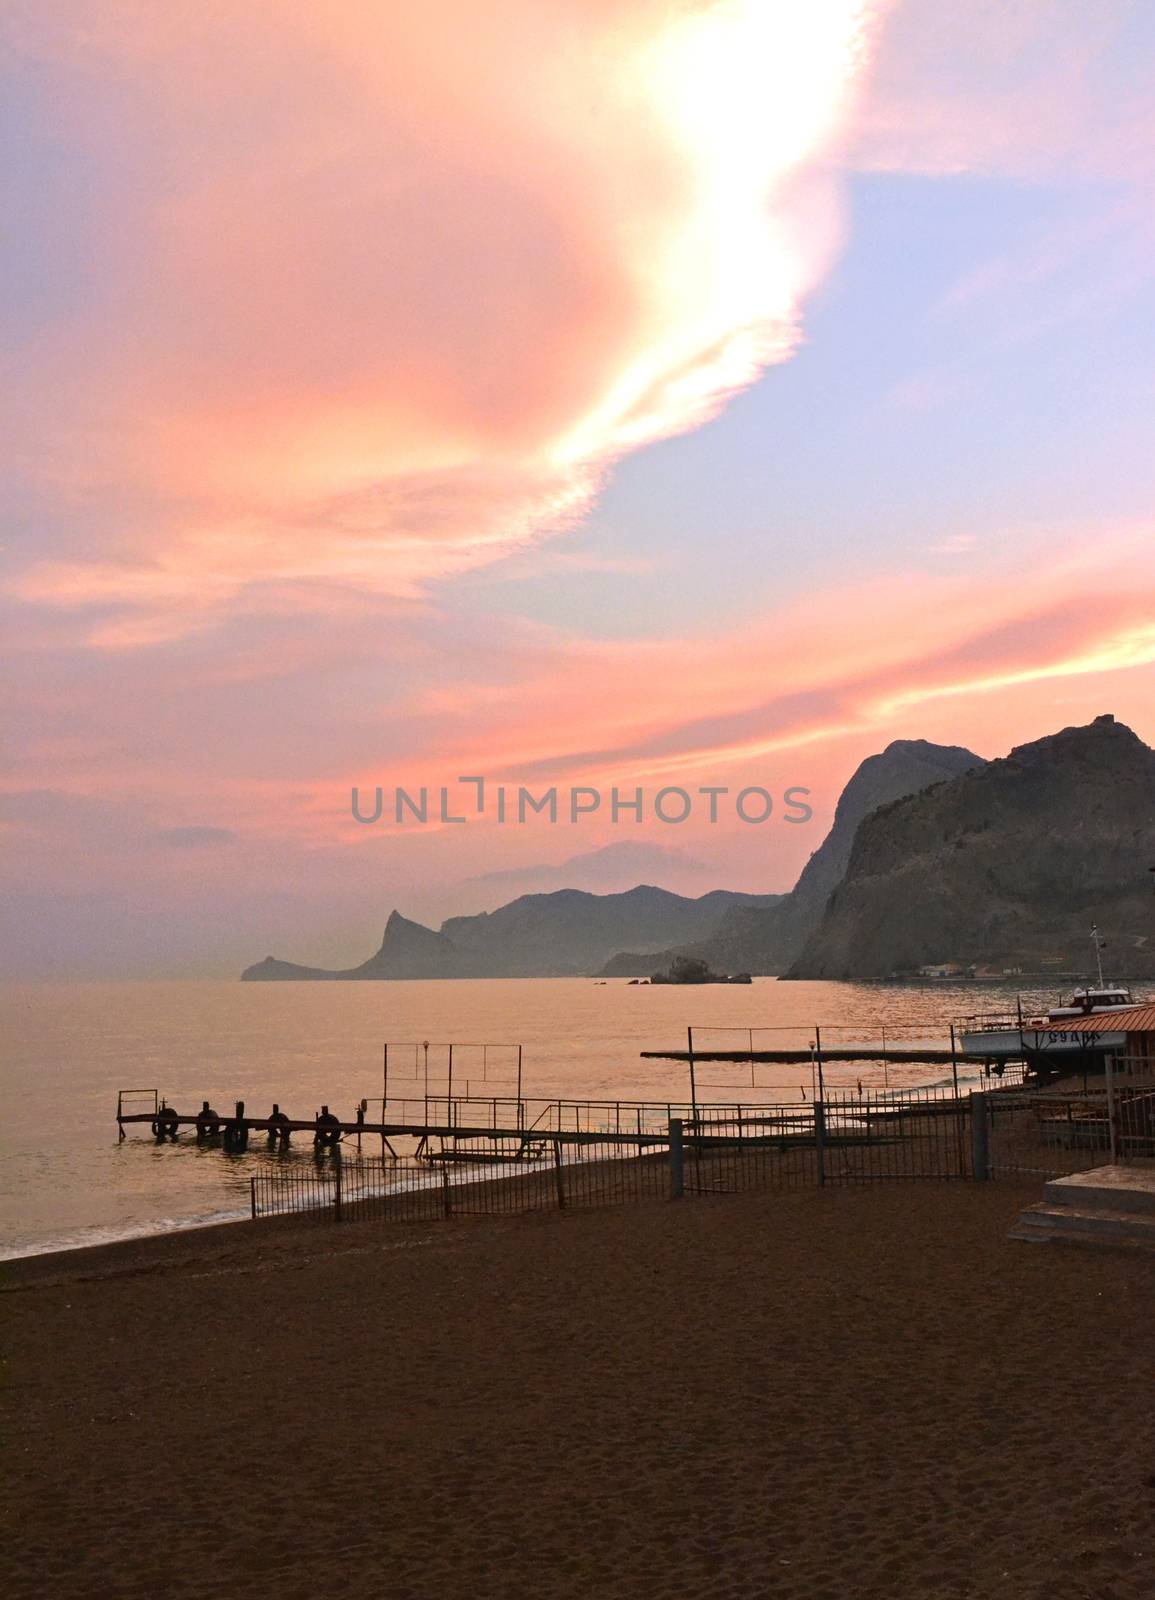 mountains, the sea, sandy beach at sunset by Irene1601